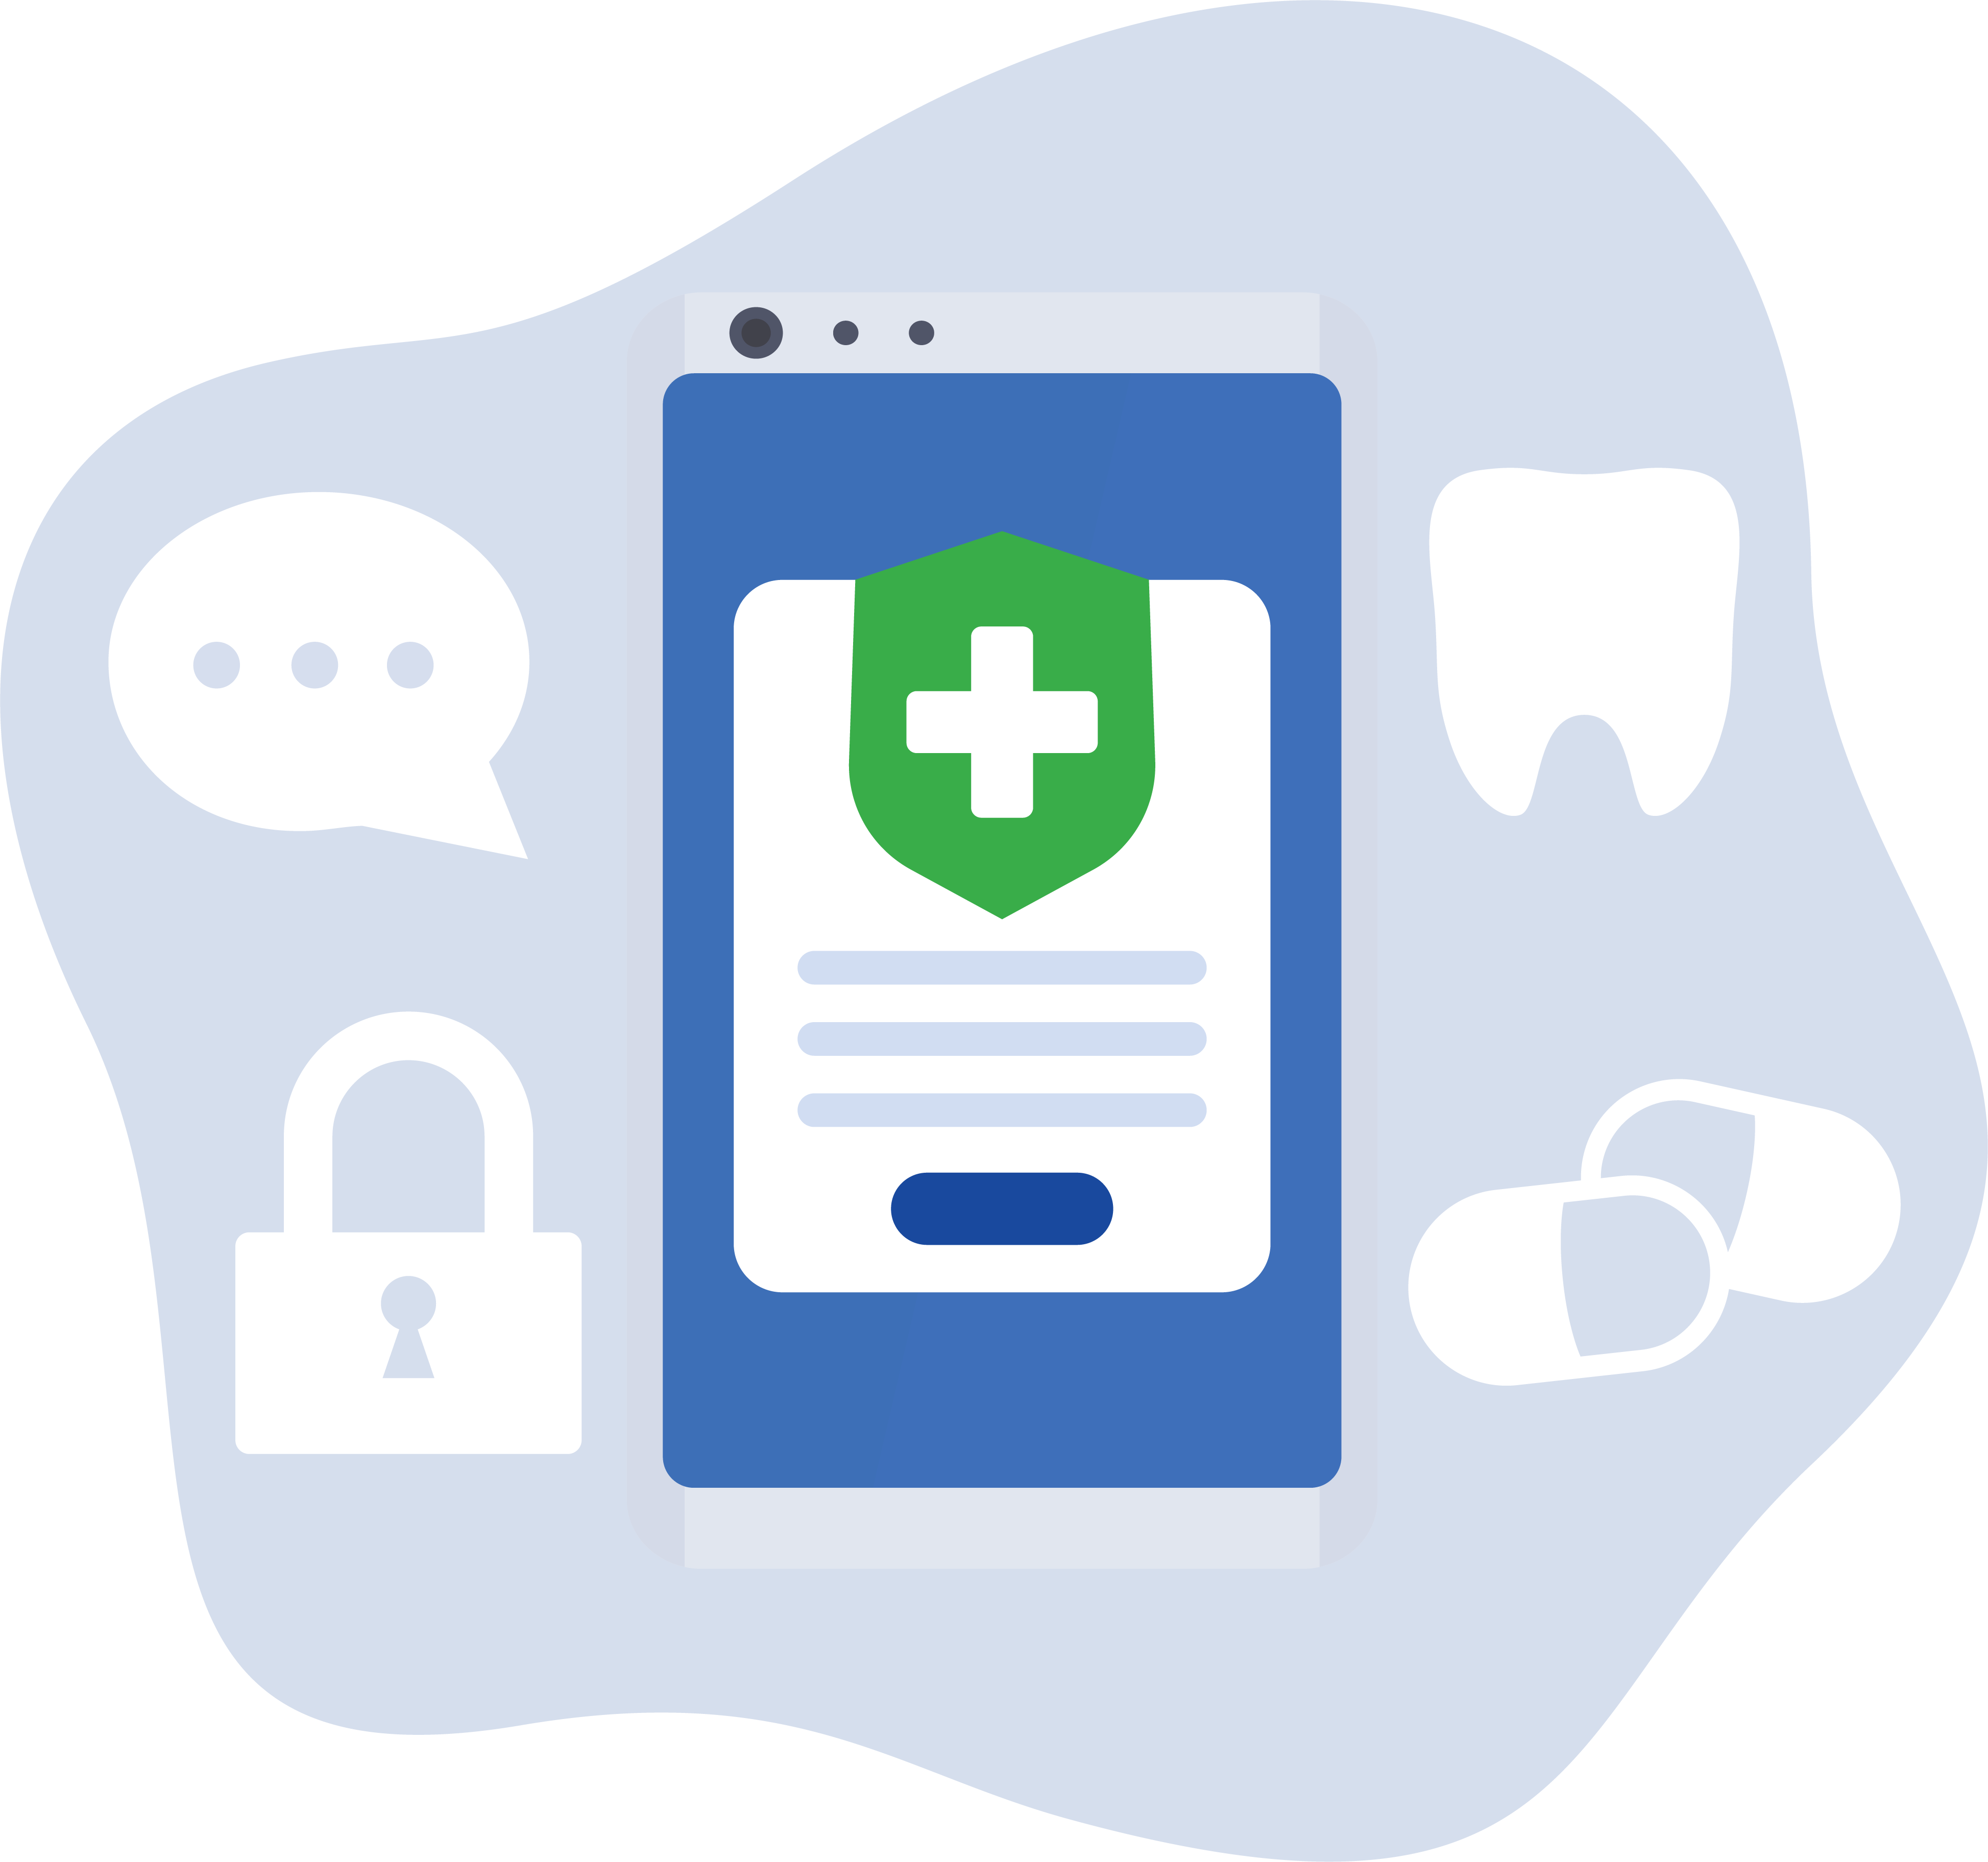 Image of a phone with a card representing an insurance plan. The phone is sitting in a bubble that contains white images of a tooth, medications, a lock, and a chat bubble.